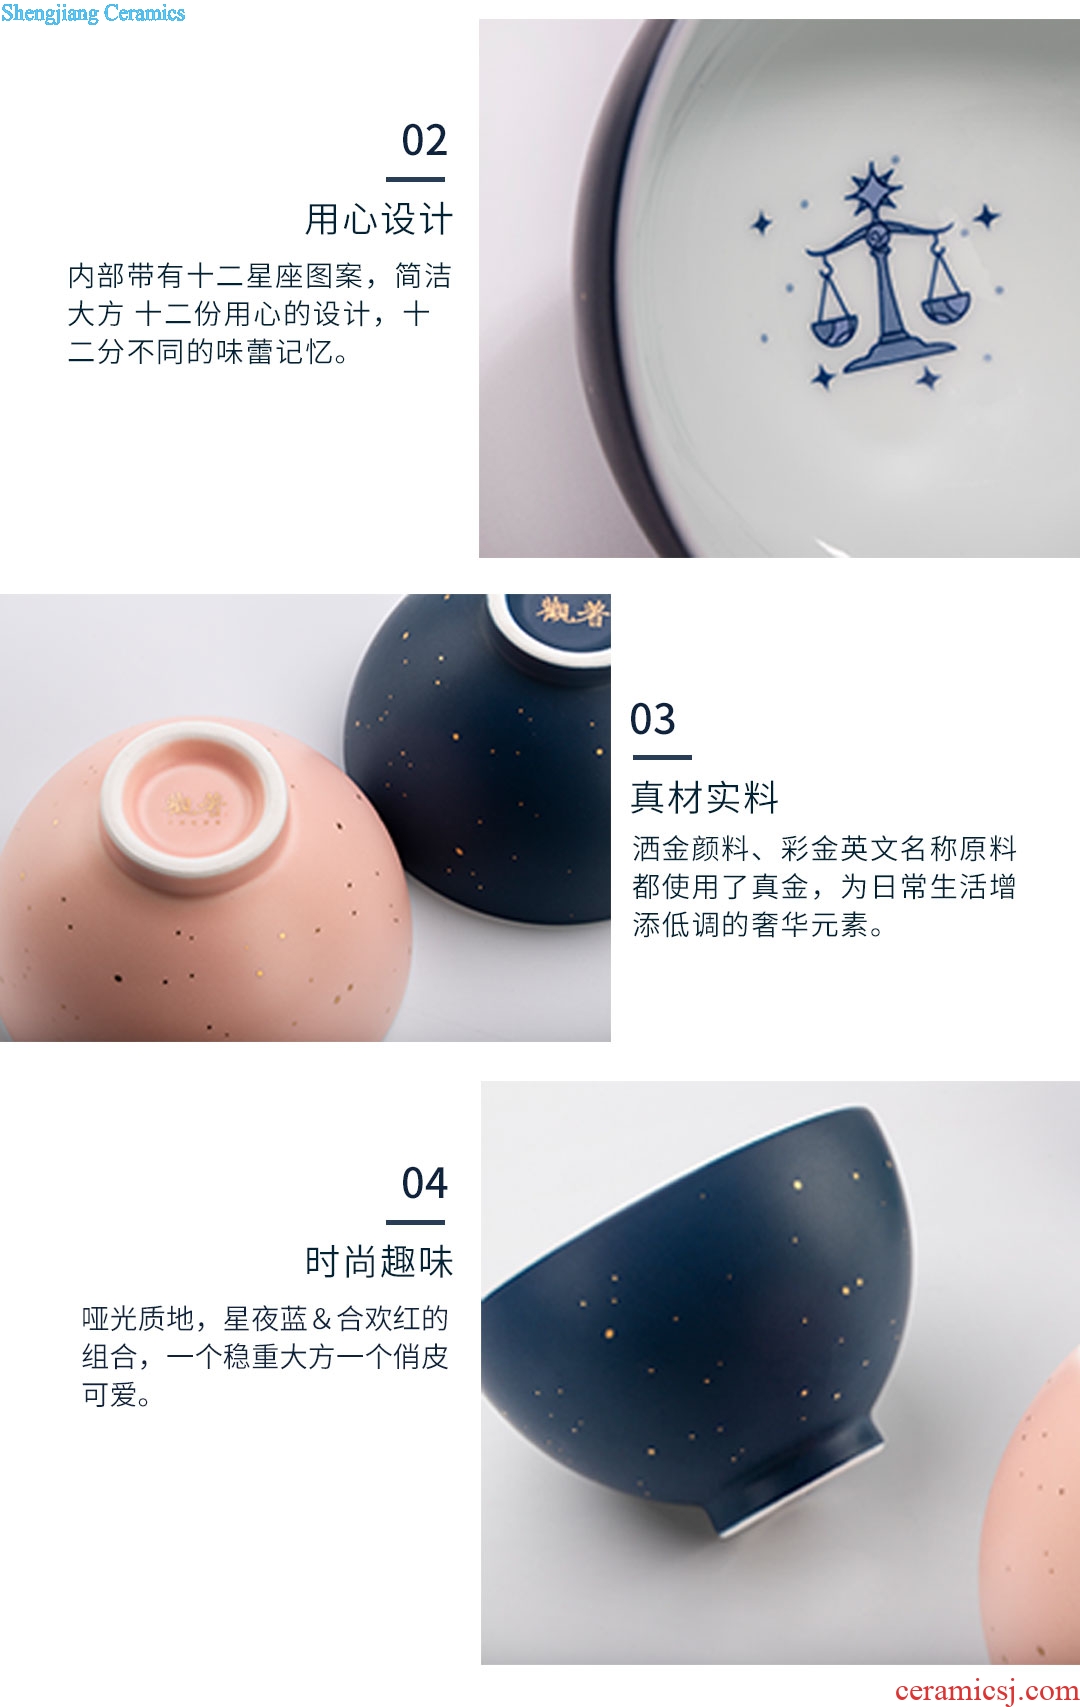 JingDe clouds in view of the original star constellation for ceramic bowl